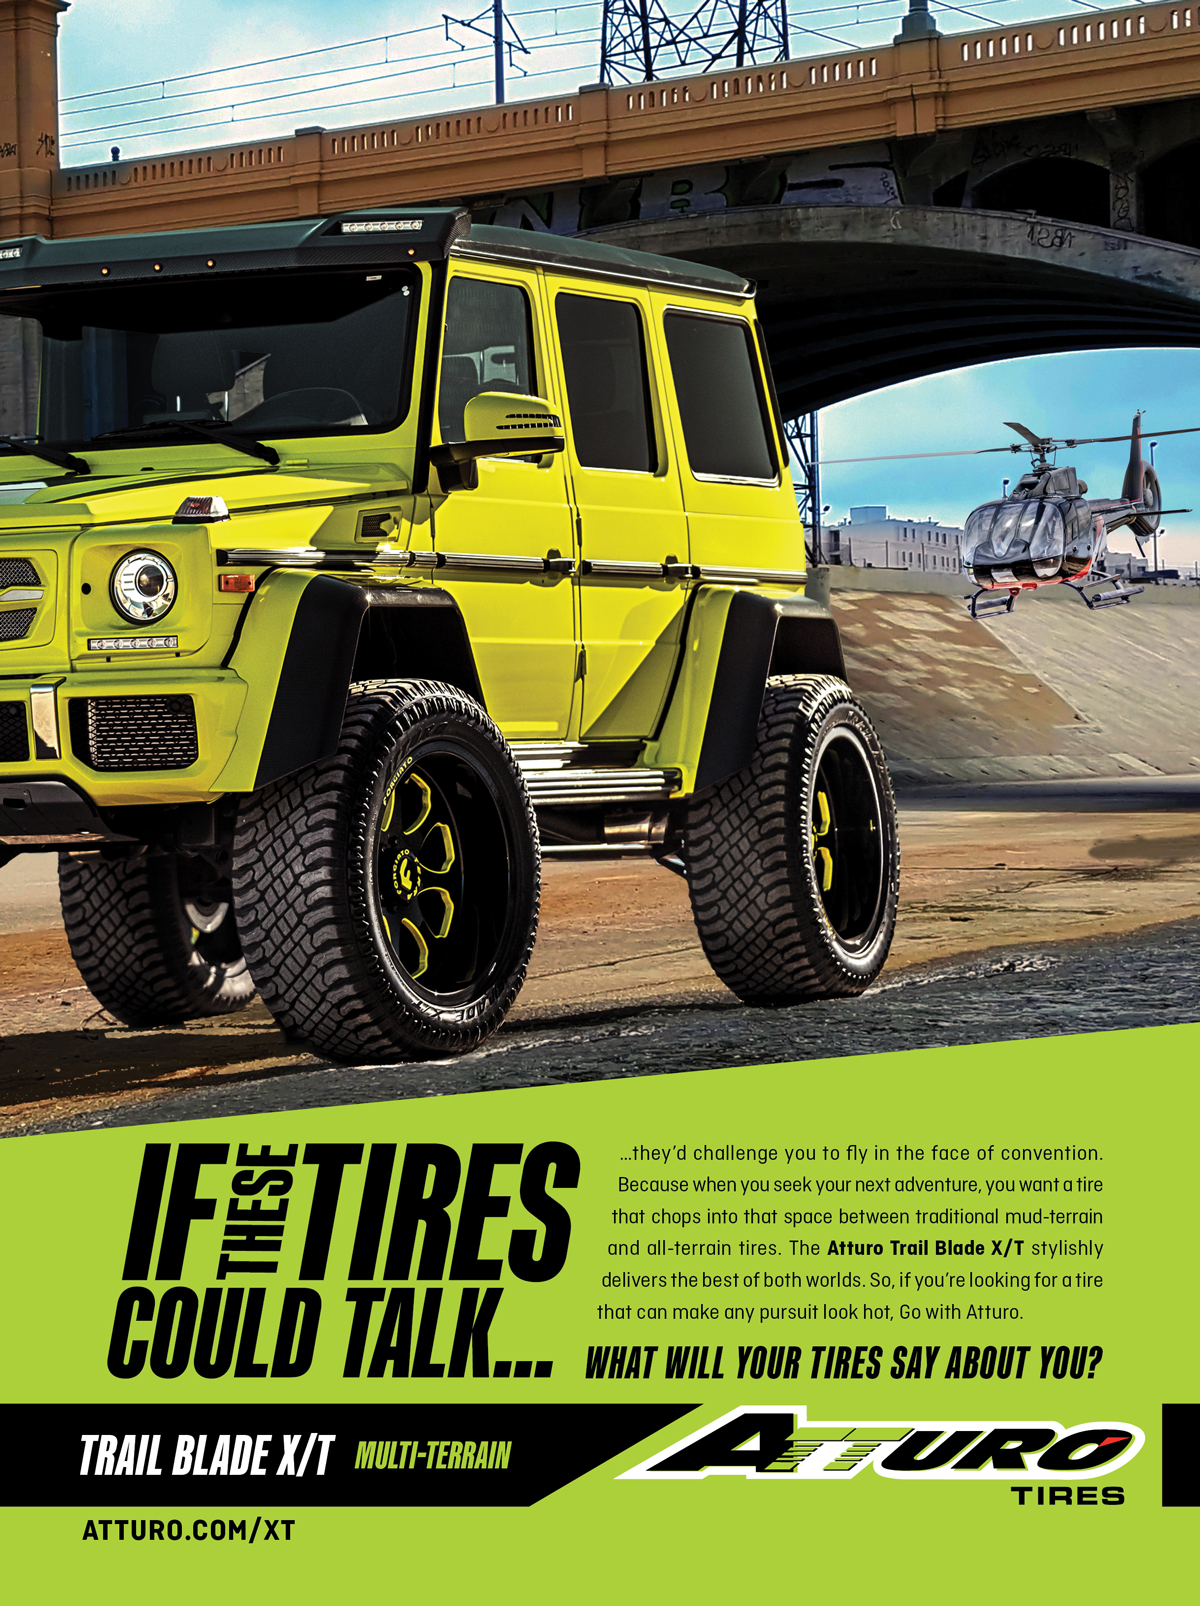 Atturo Tires - Print Ad - If These Tires Could Talk - Trail Blade X/T